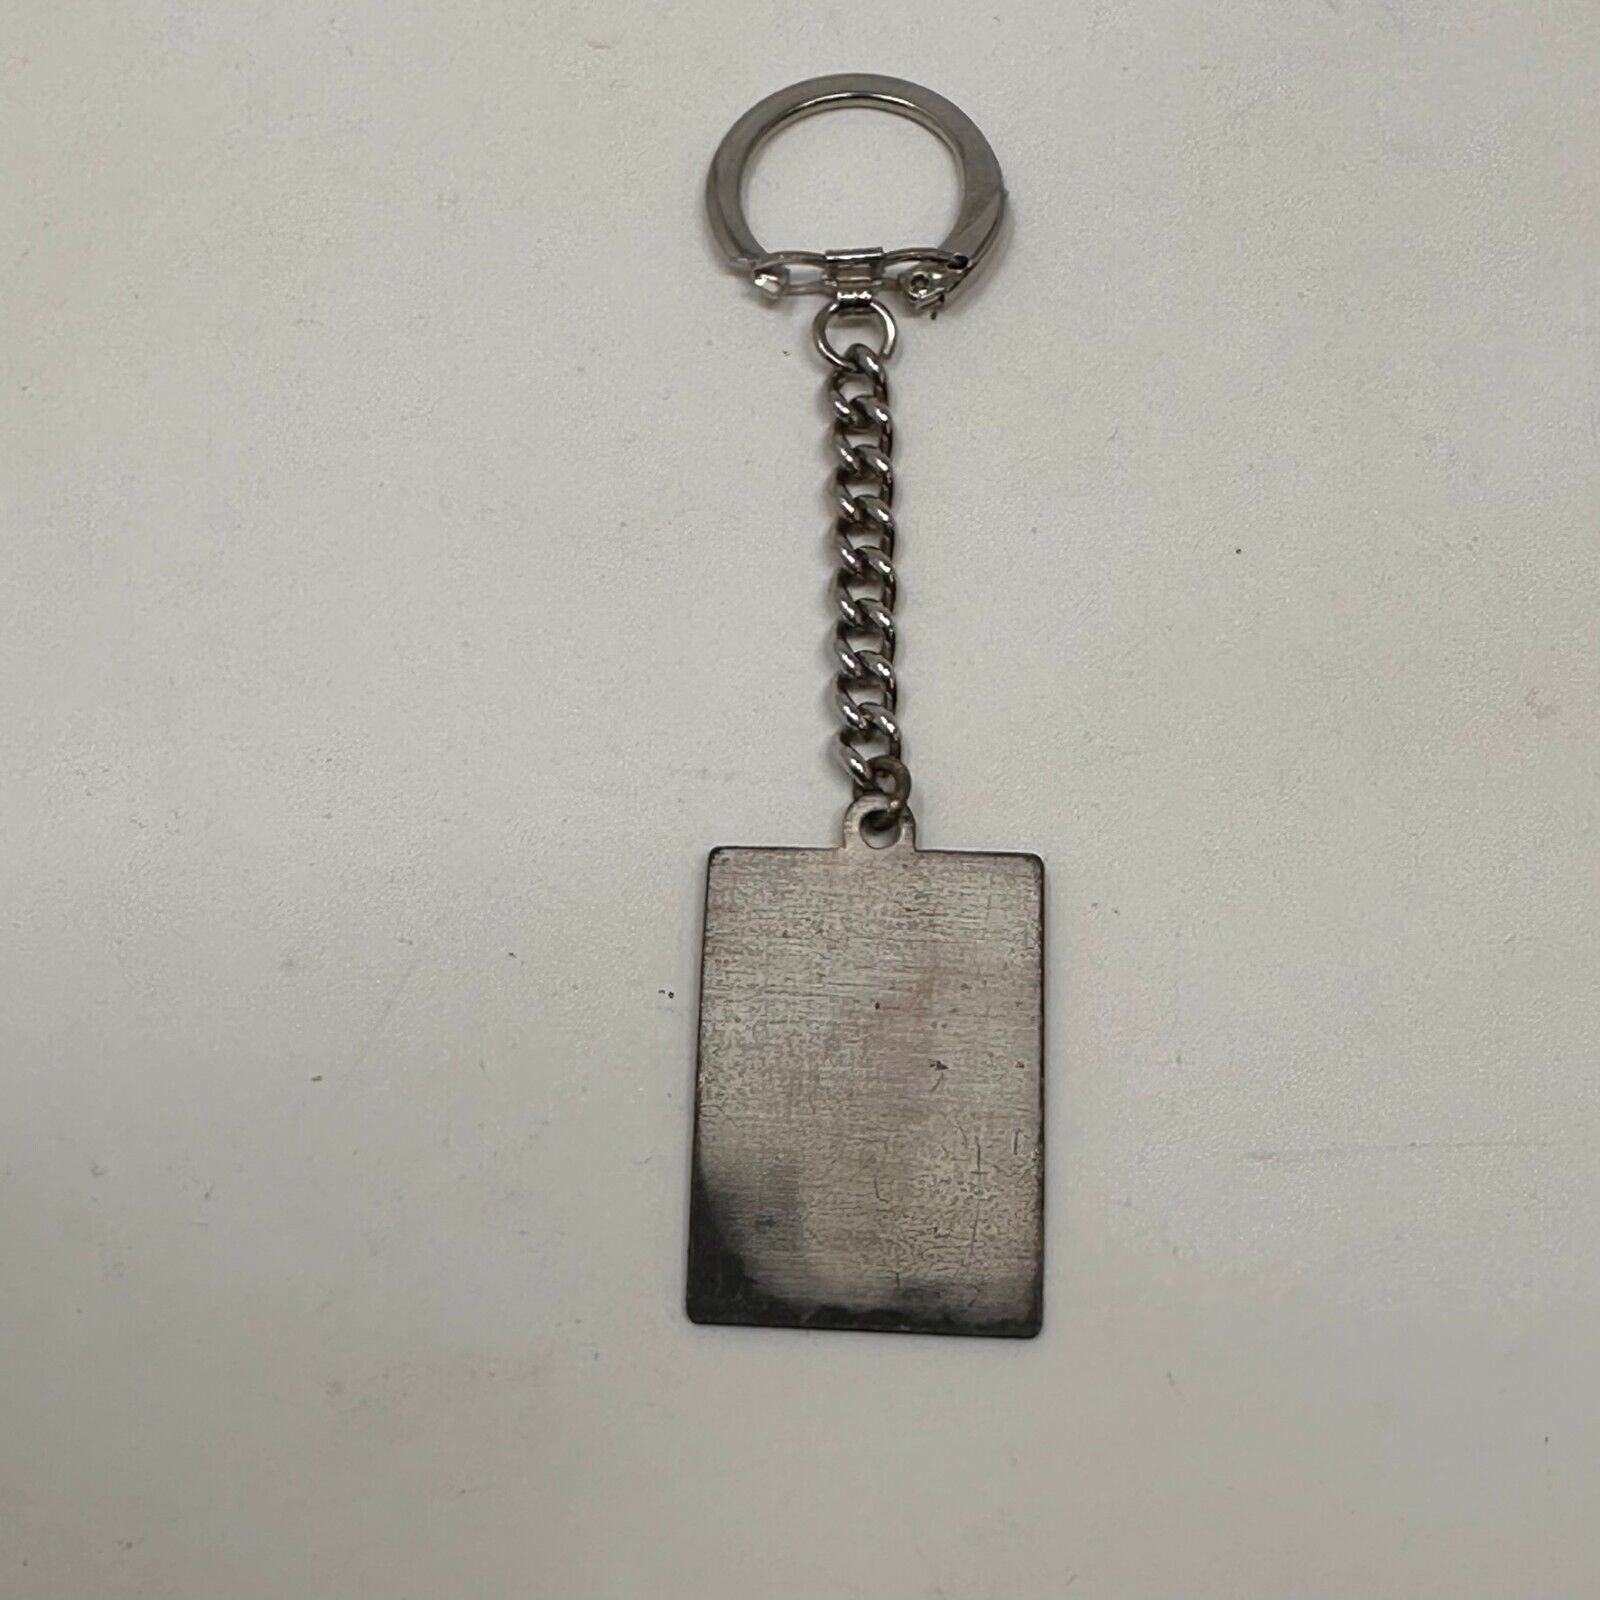 Primary image for US Army Recreation Center Keychain from 1990's (Vintage)